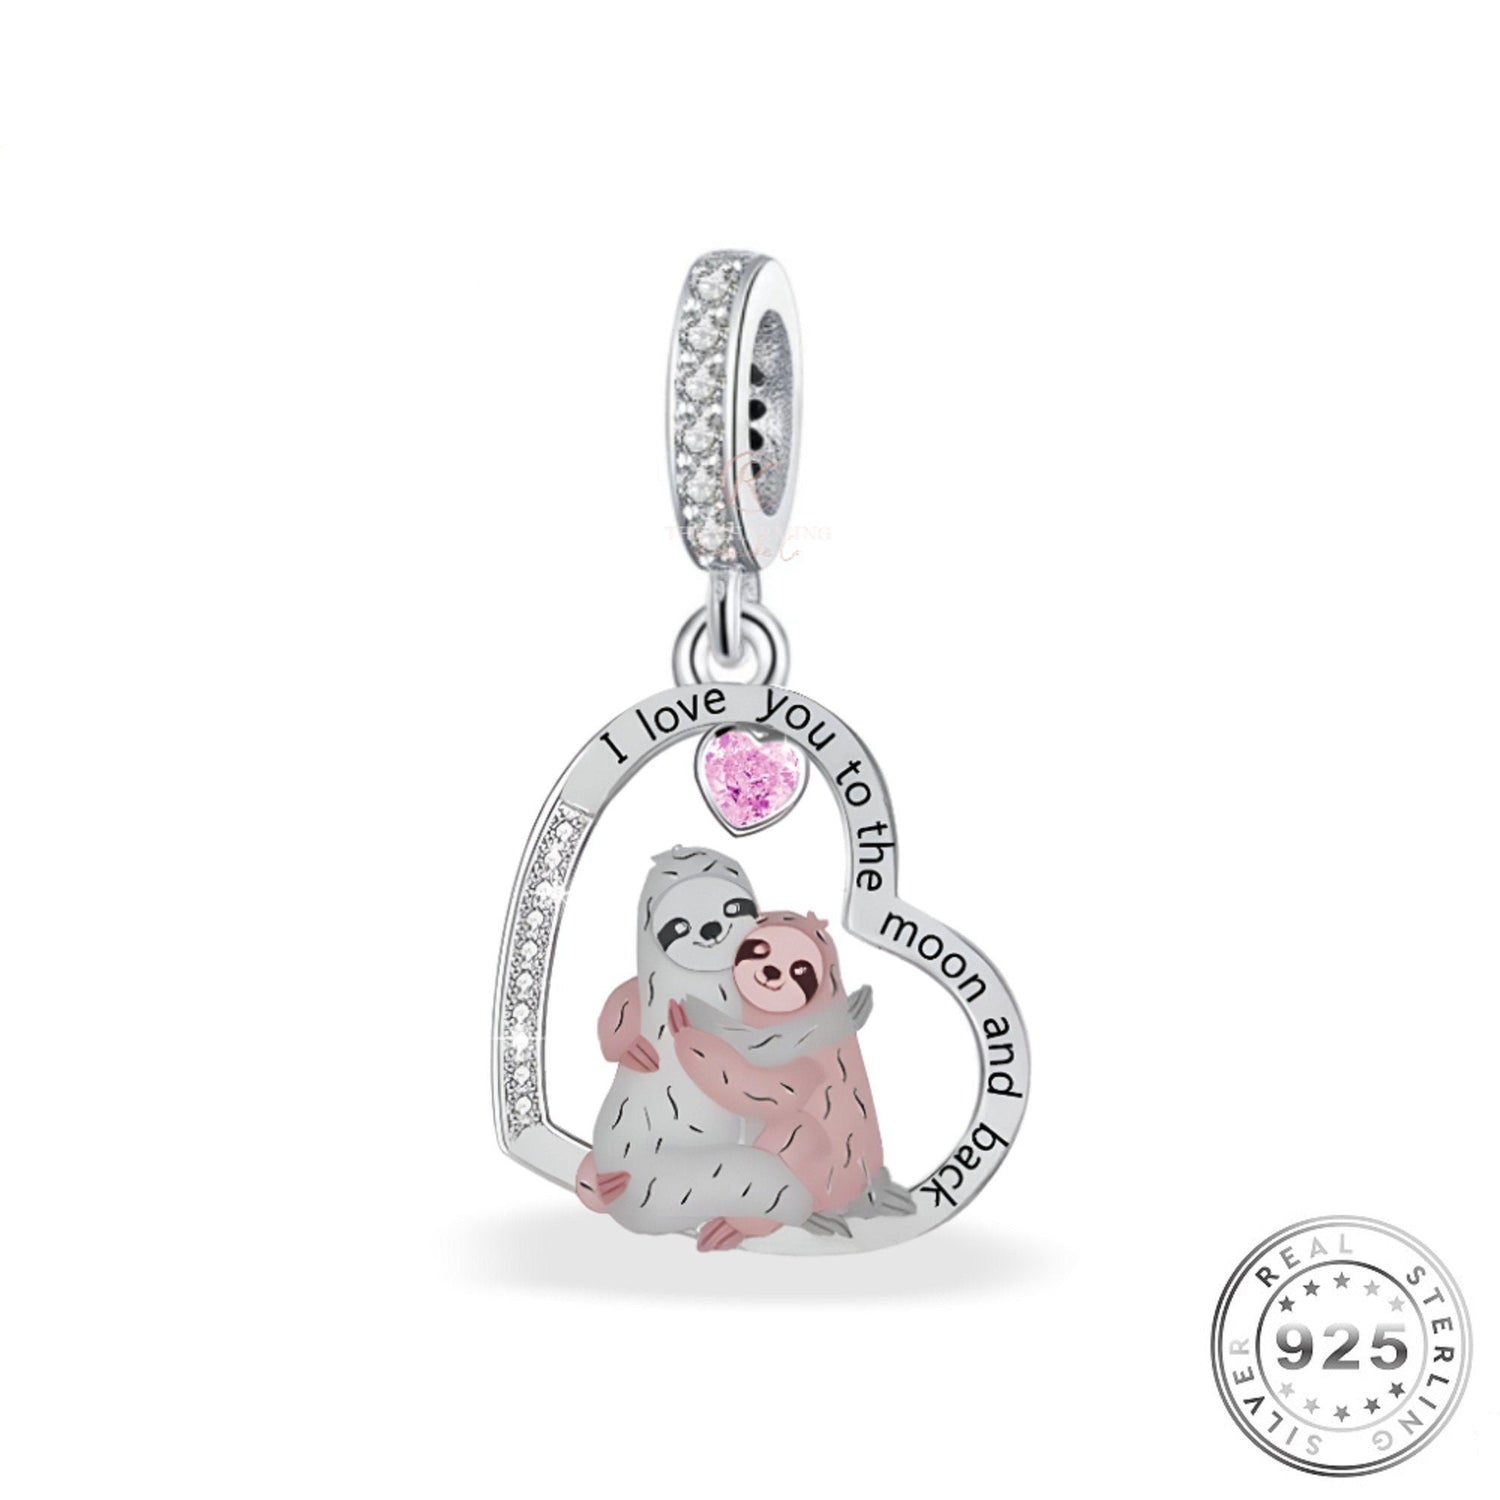 Sloth Charm I Love You To The Moon & Back 925 Sterling Silver fits pandora